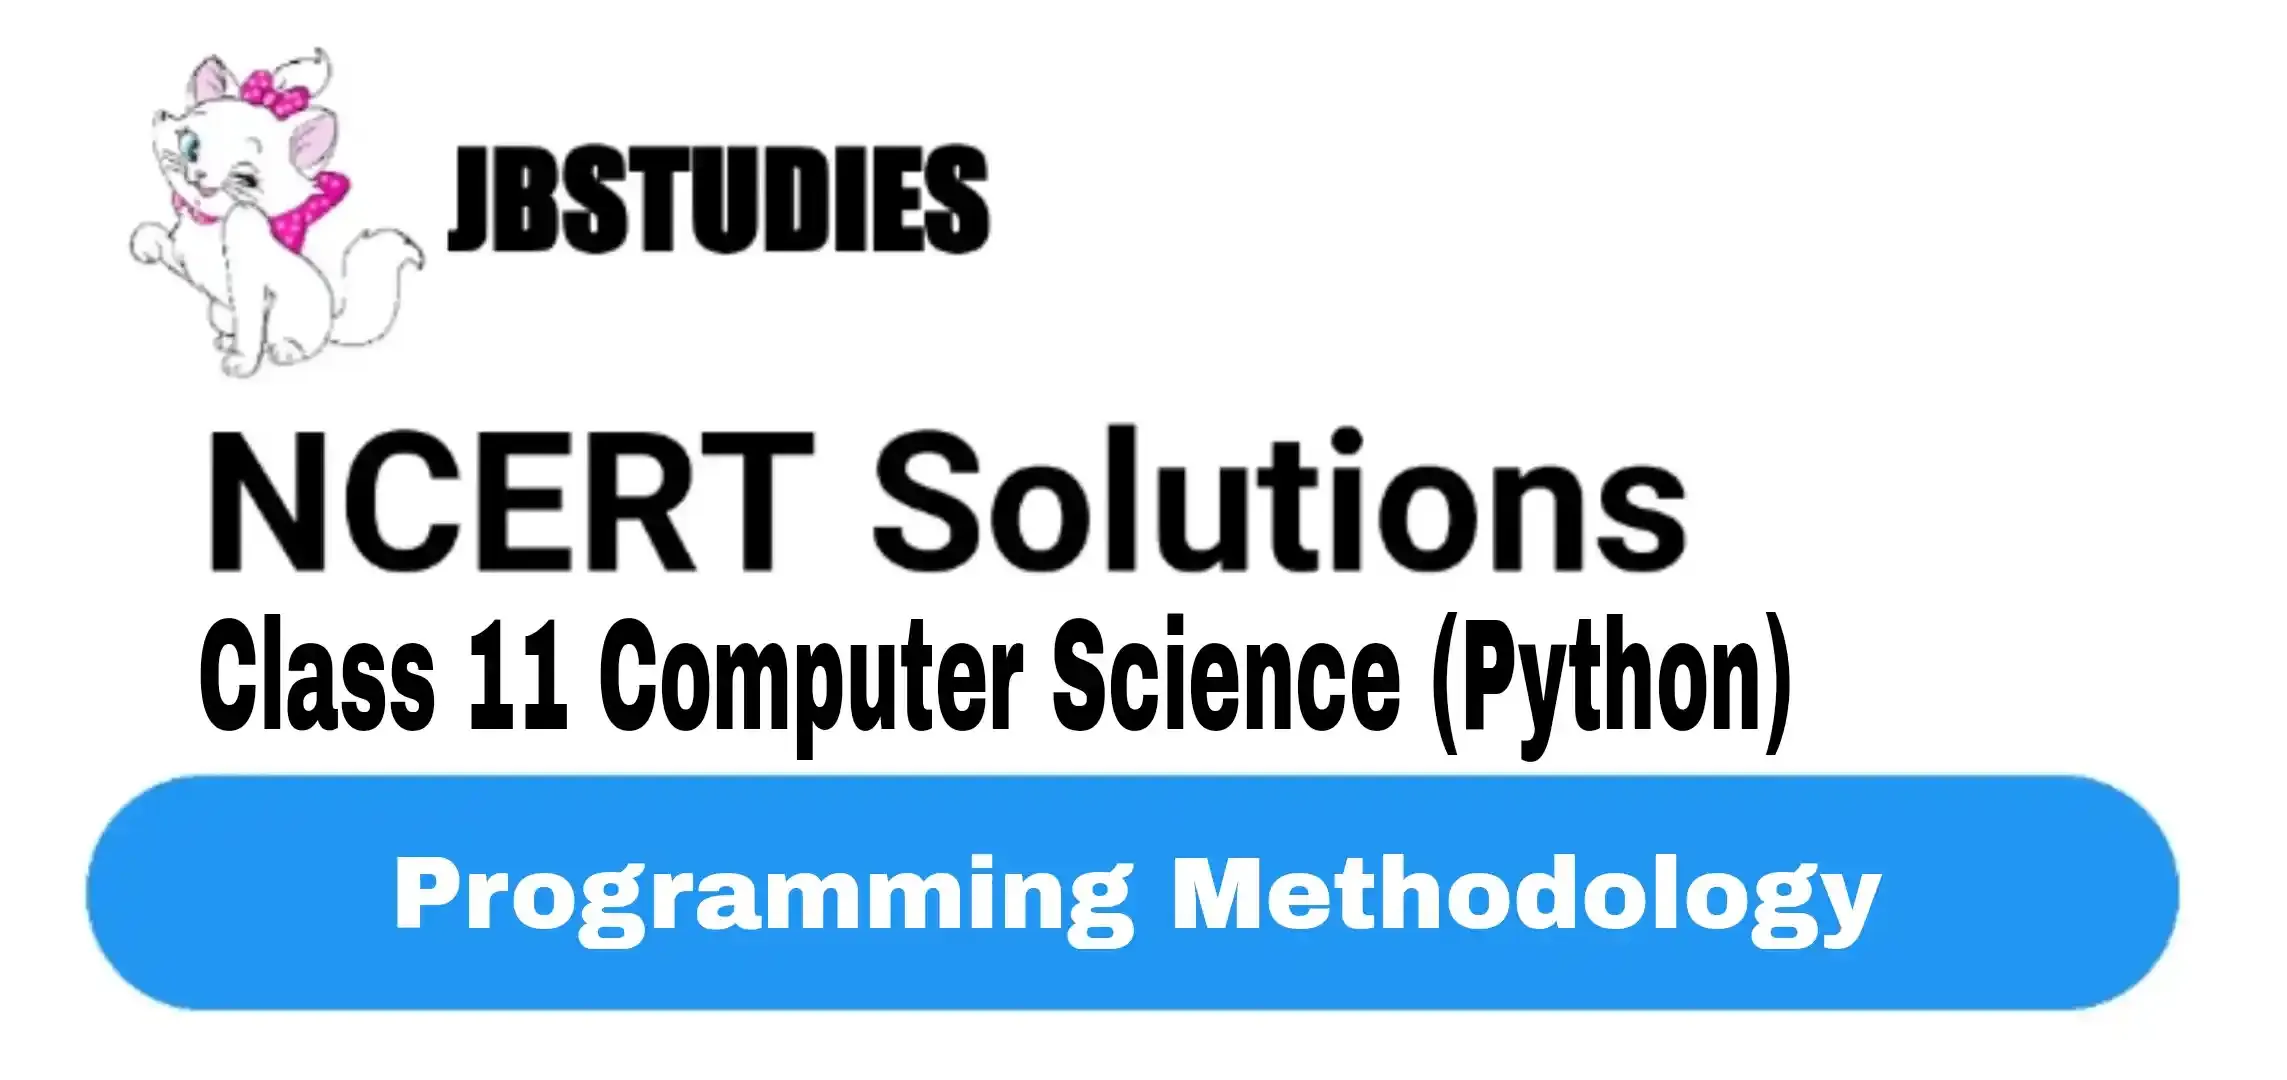 Solutions Class 11 Computer Science (Python) Chapter-5 (Programming Methodology)